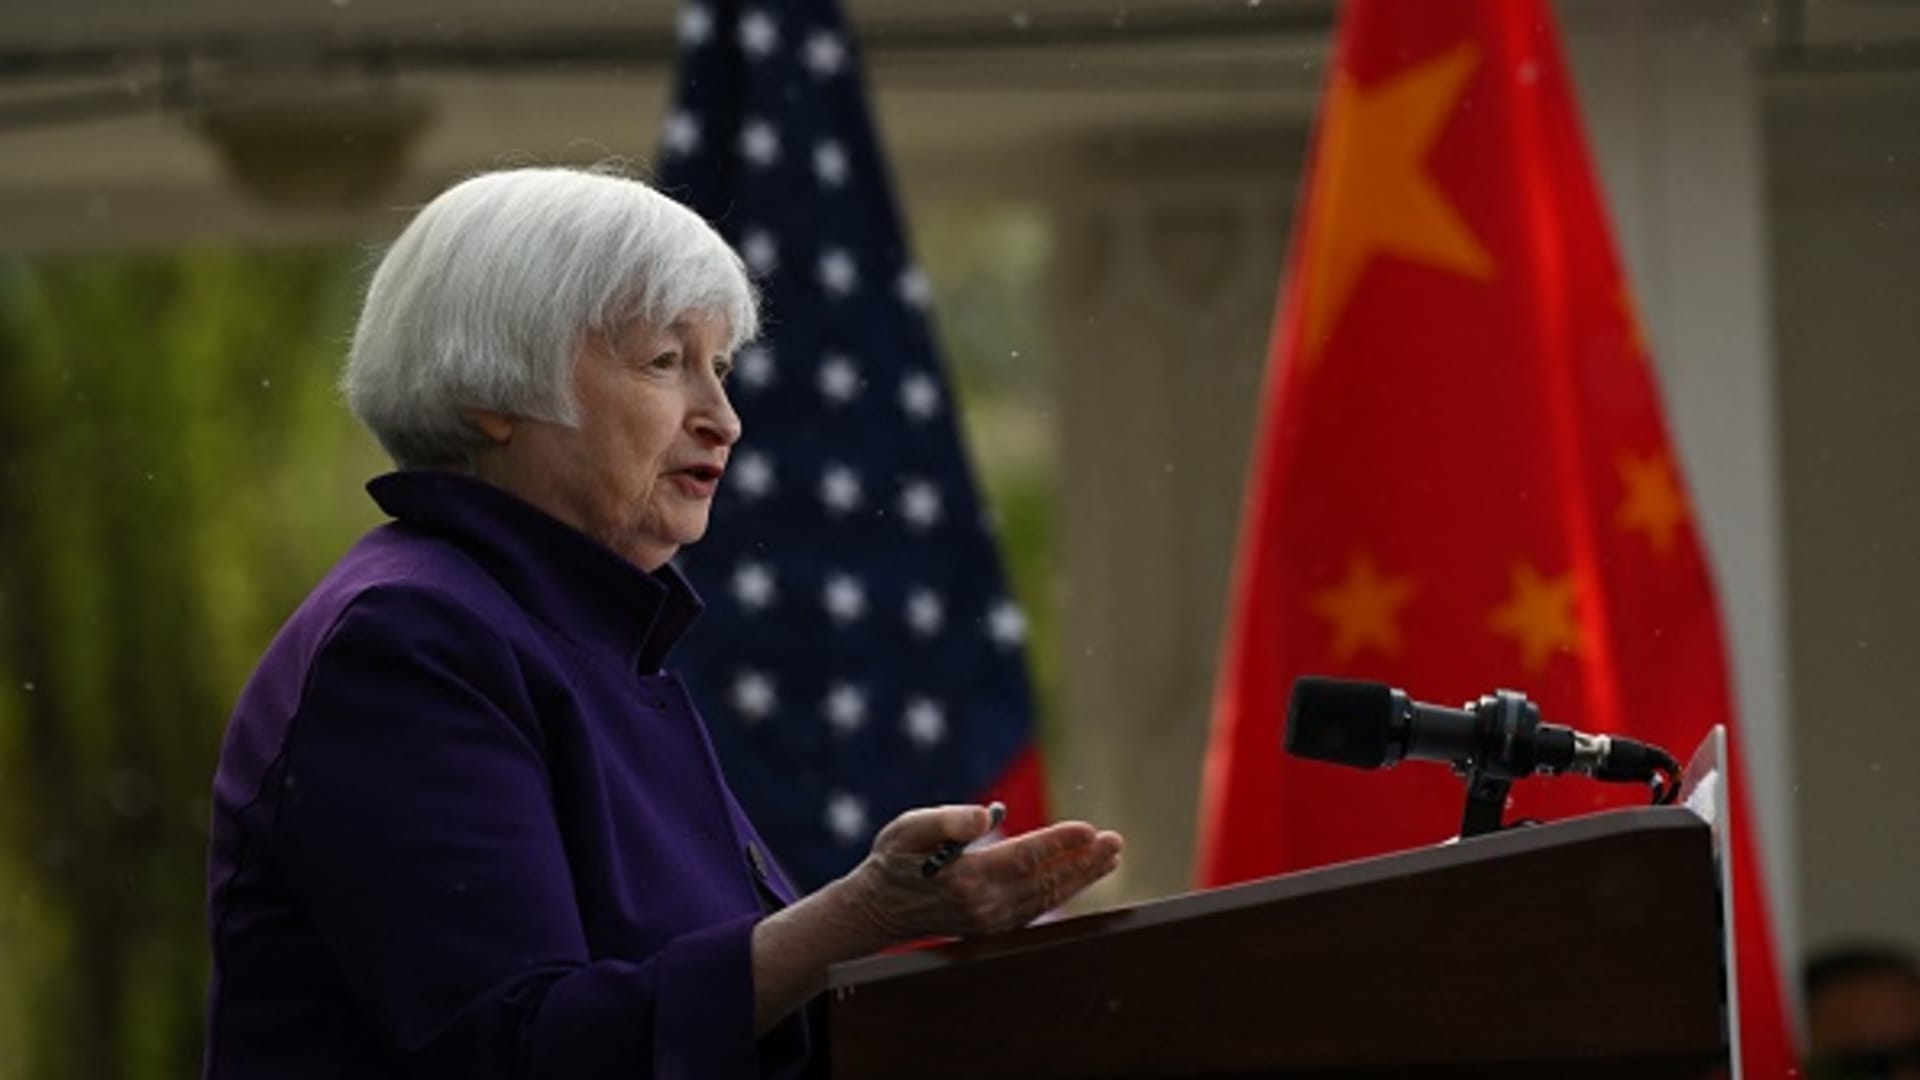 Yellen says U.S. plans to ‘underscore’ need for China to shift policy